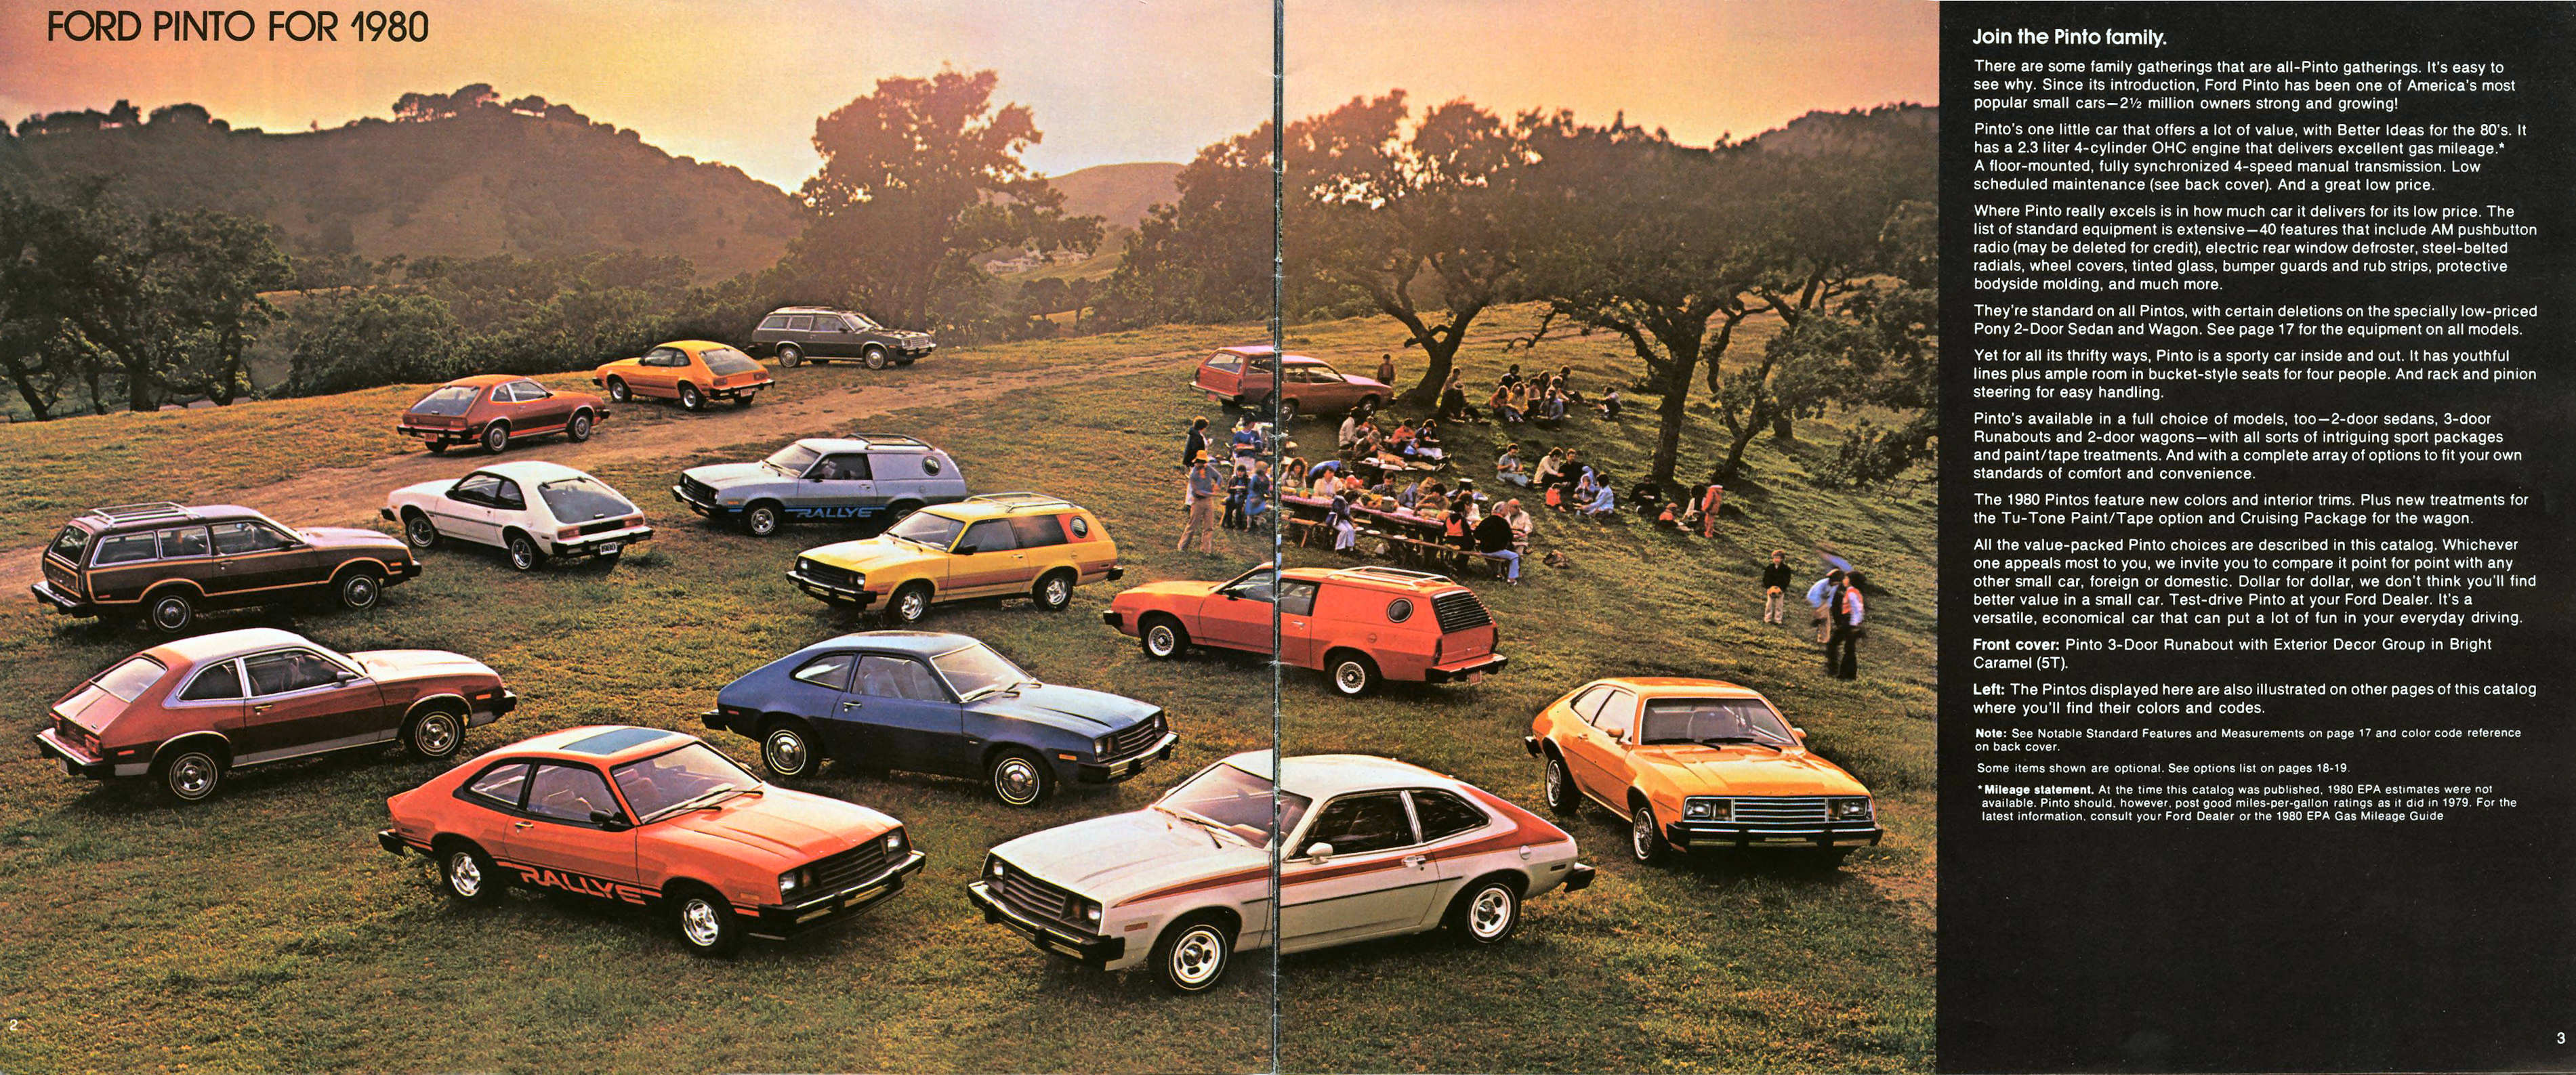 1980_Ford_Pinto-02-03